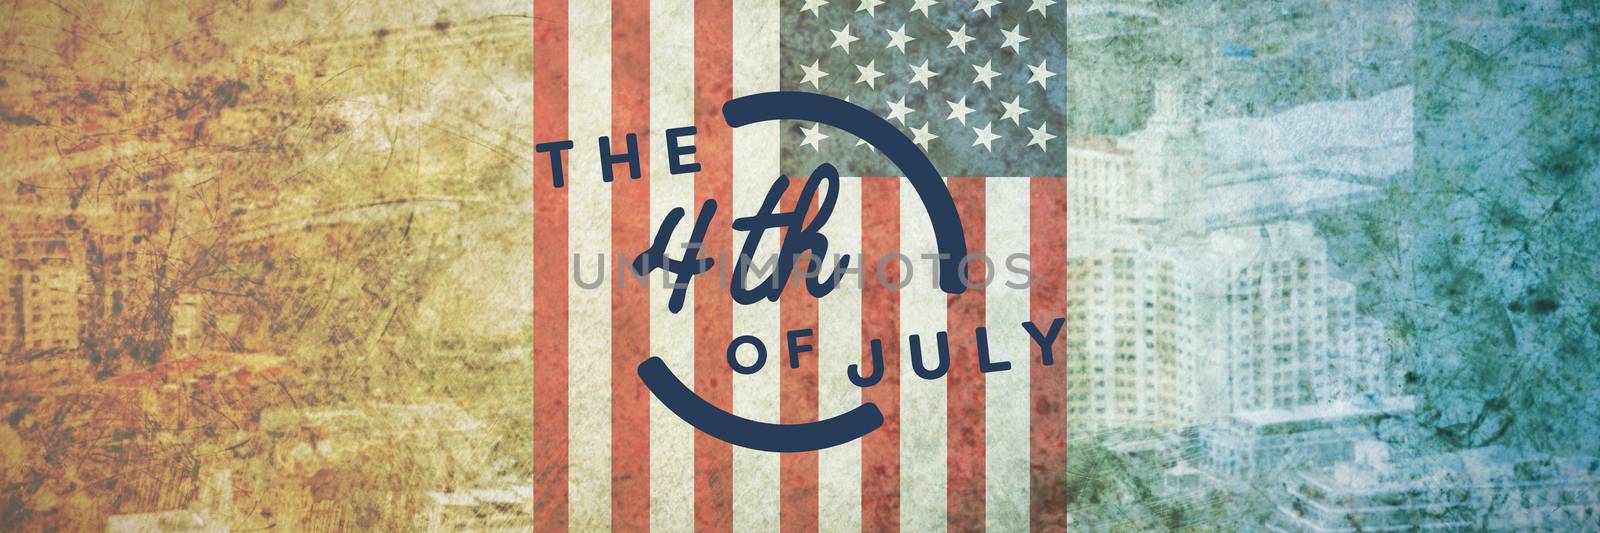 Colorful happy 4th of july text against white background against new york